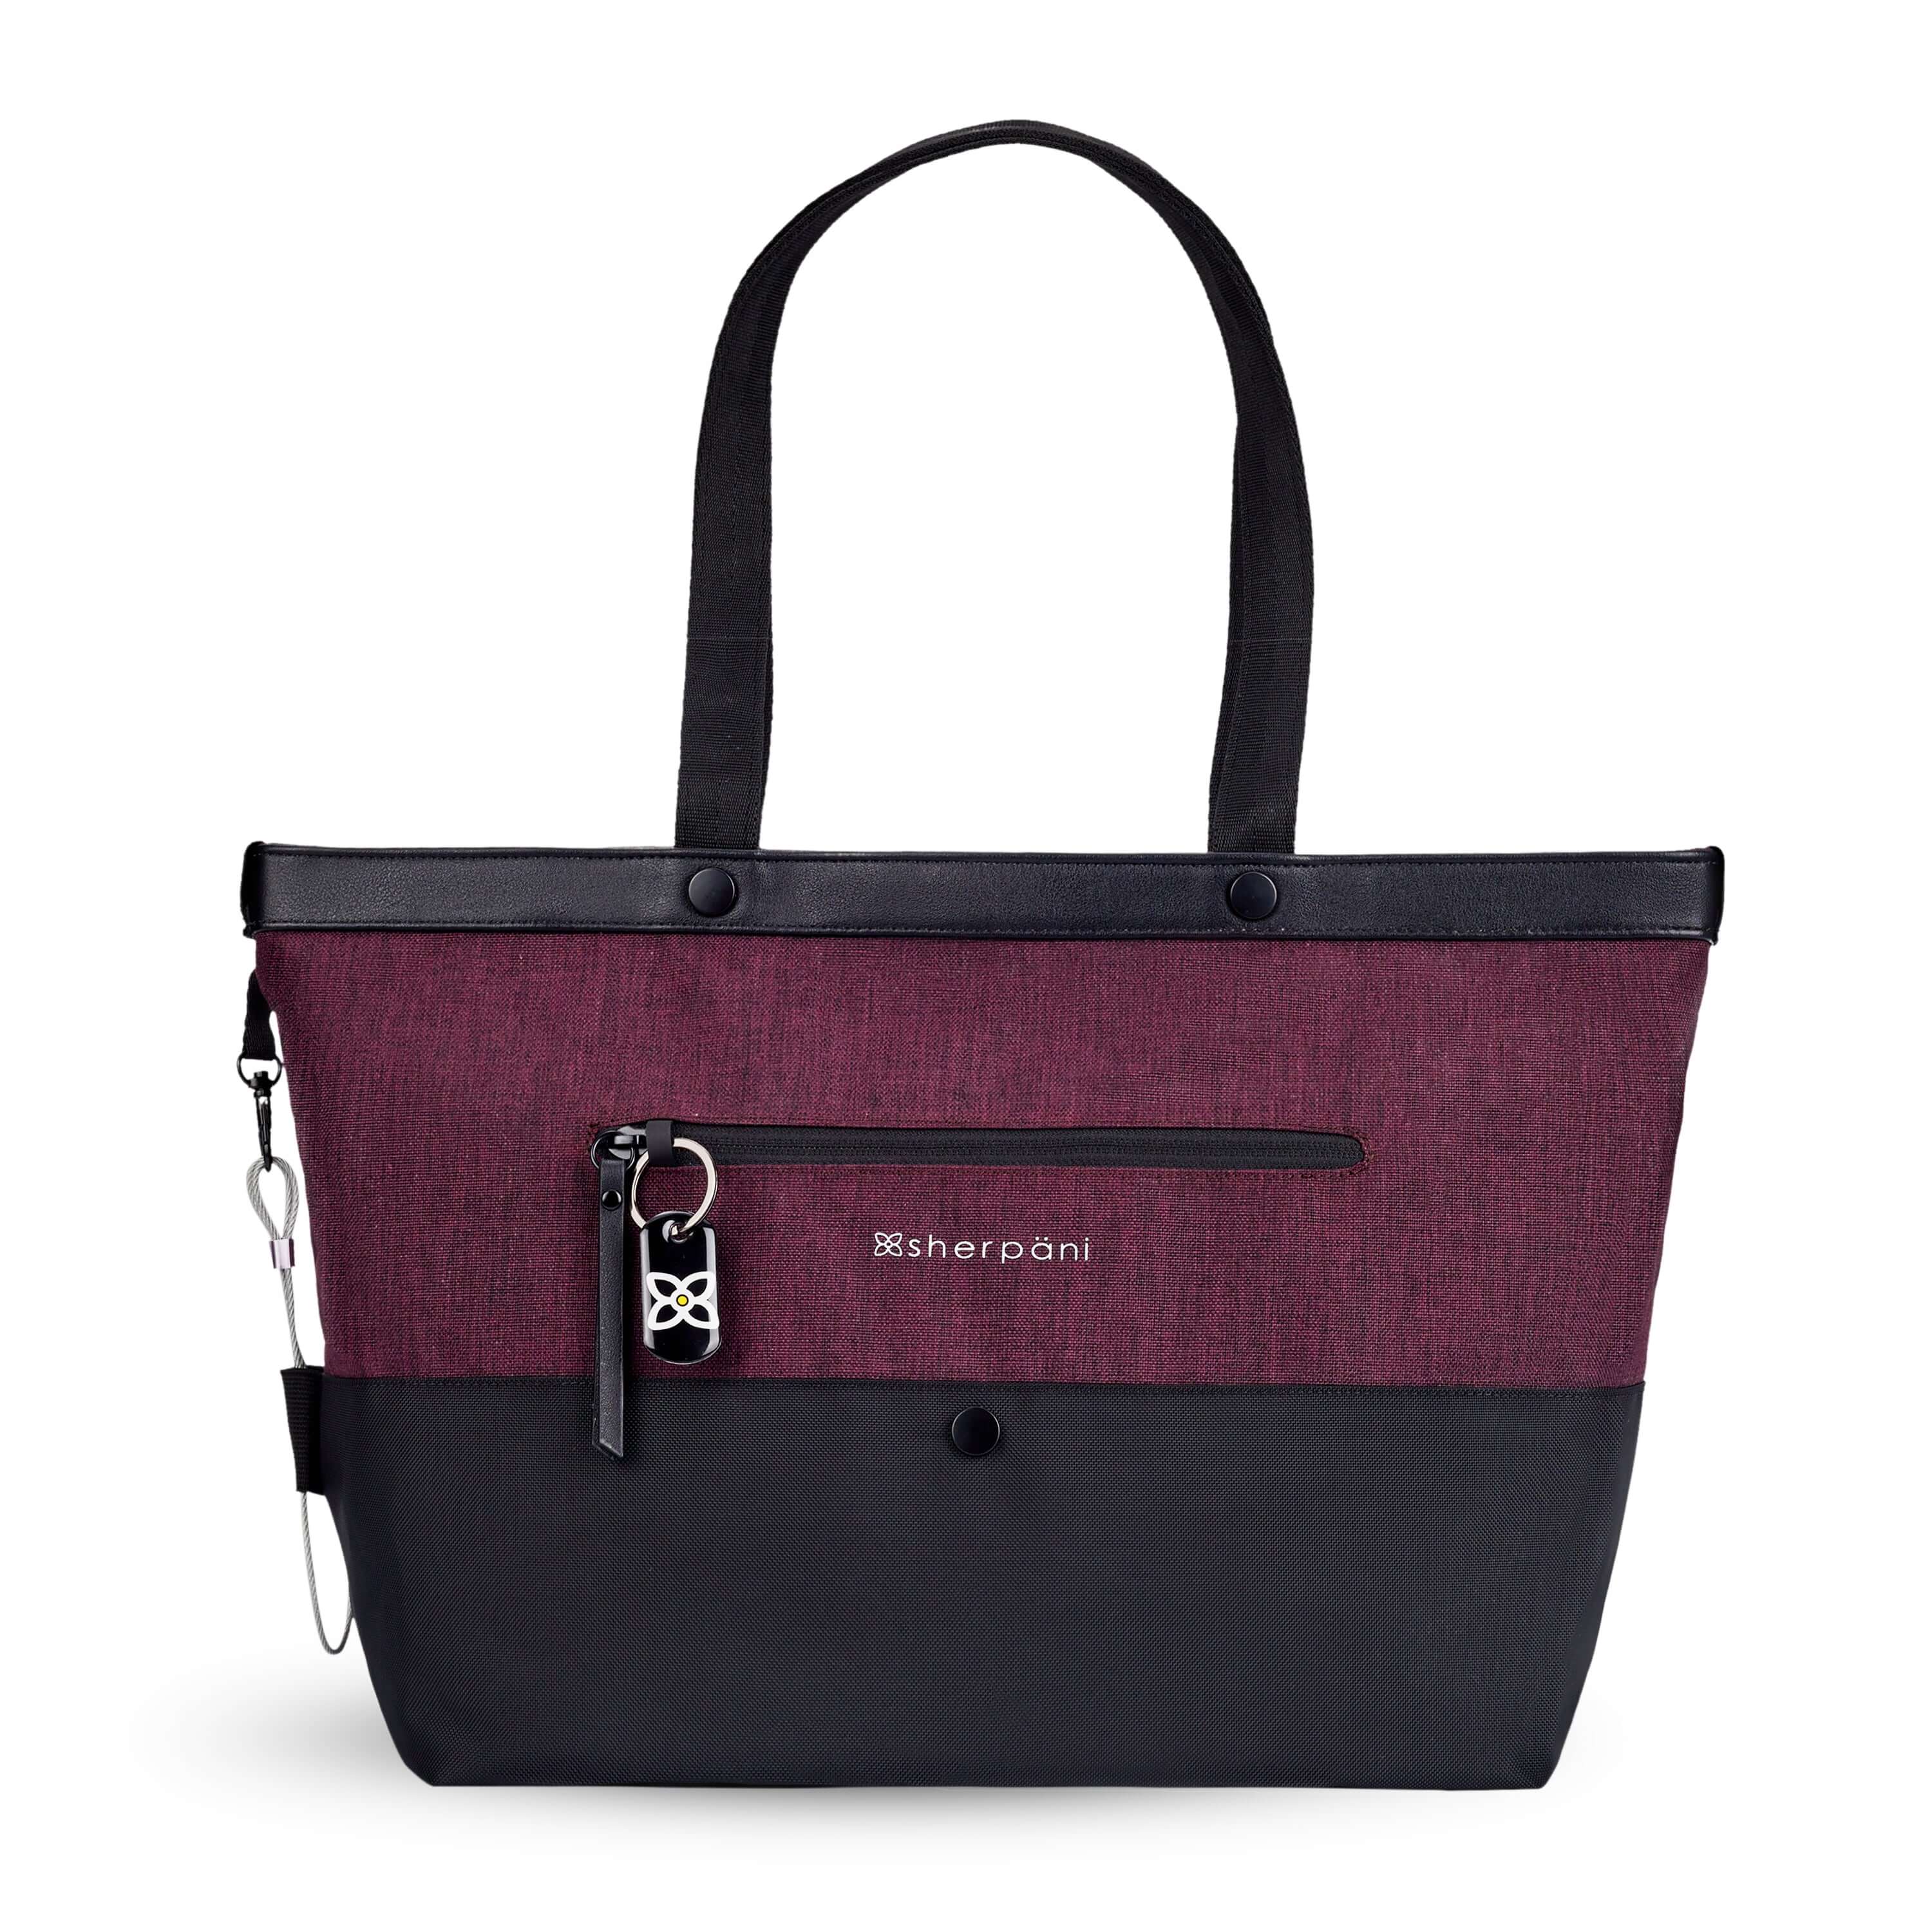 Flat front view of Sherpani's Anti-Theft tote, the Cali AT in Merlot, with vegan leather accents in black. There is an external compartment on the front of the bag with a locking zipper and ReturnMe tag. A chair loop lock is clipped to the side of the bag and is held in place by an elastic tab. 